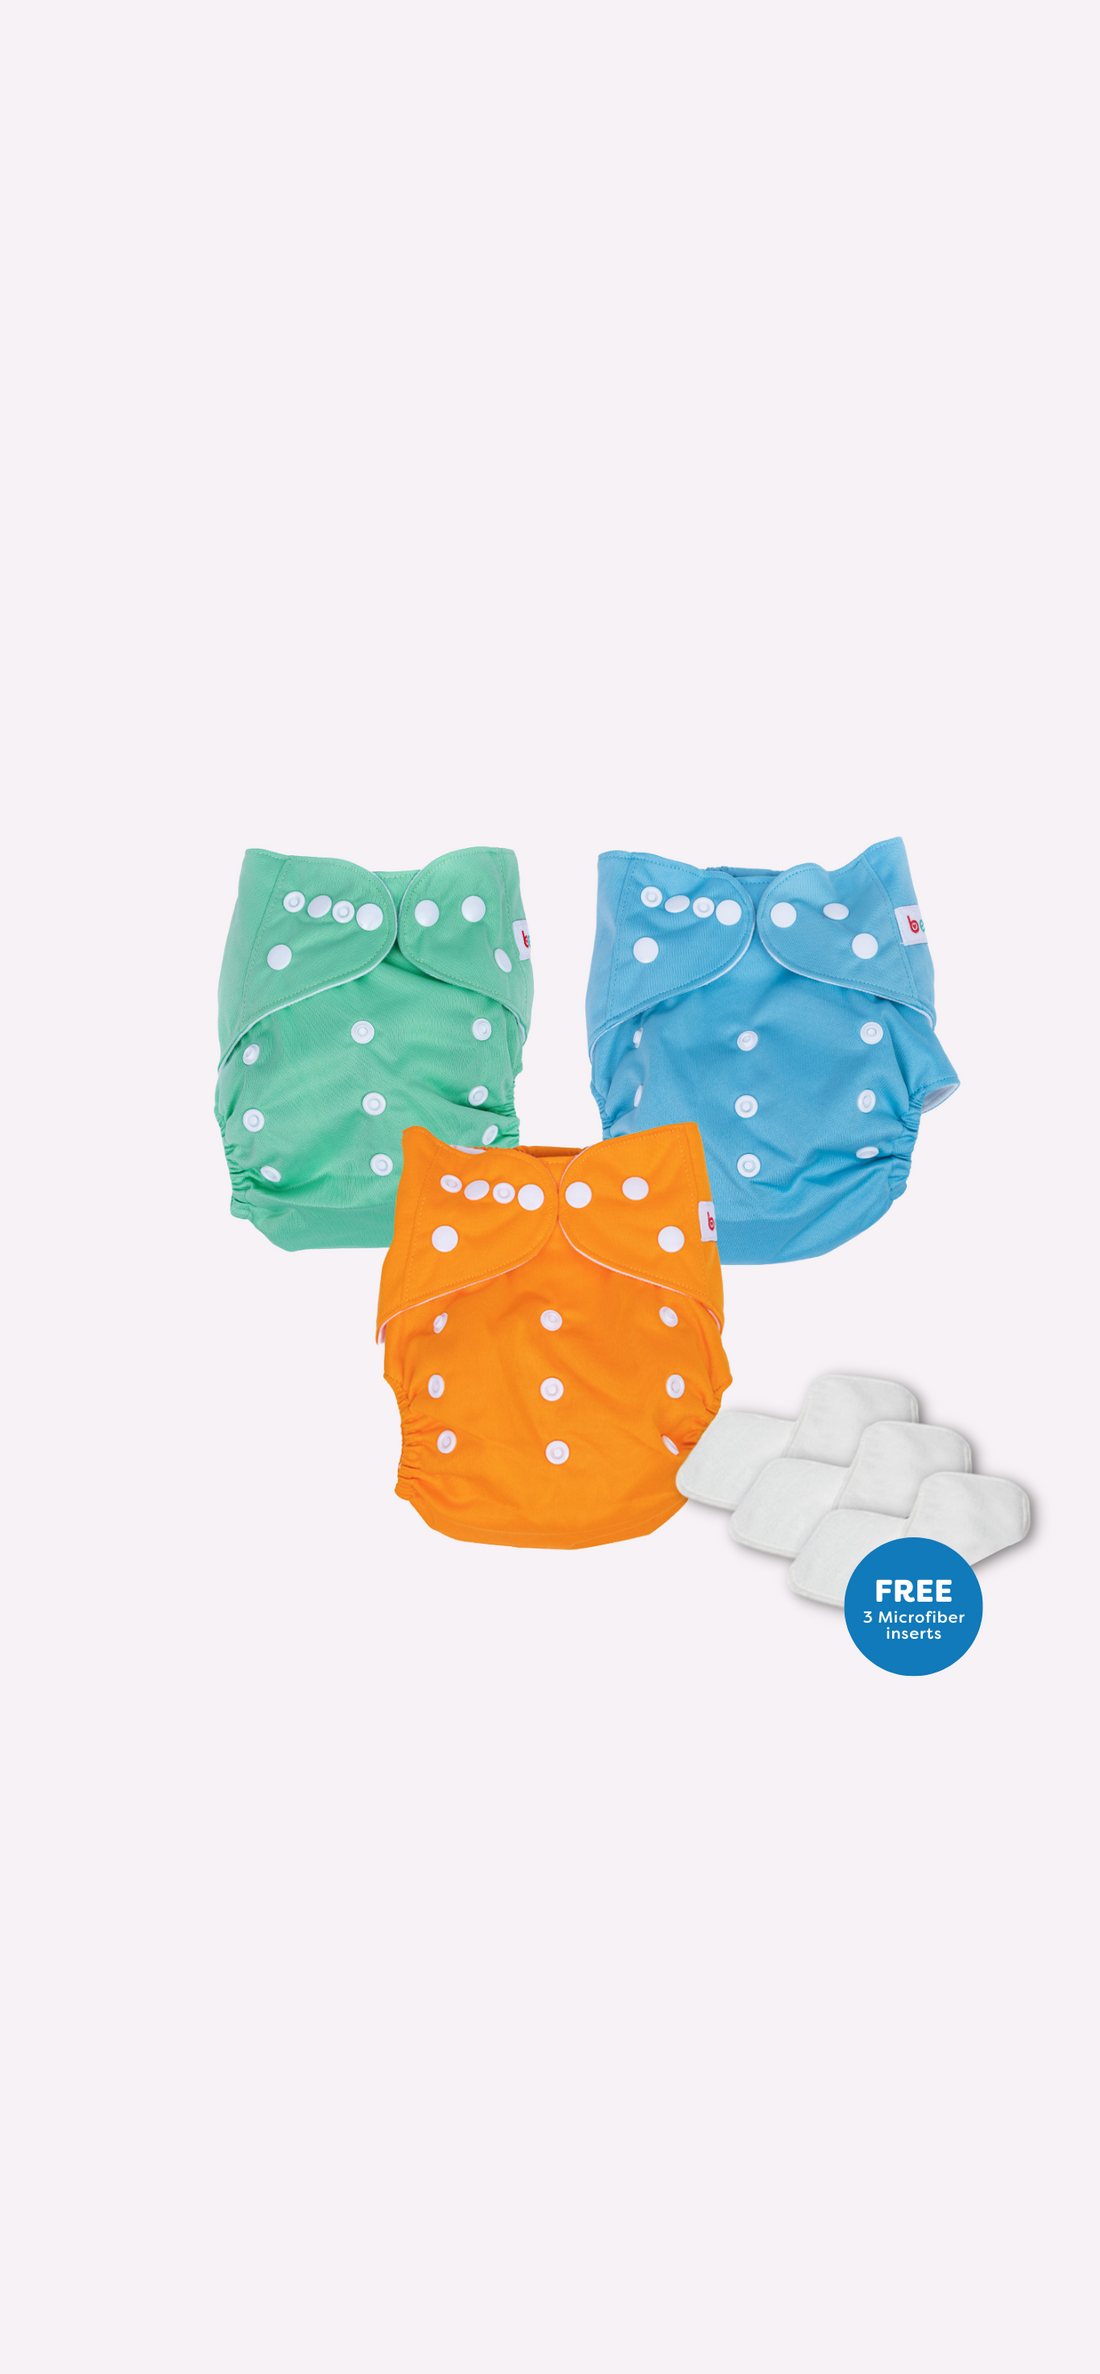 Snappies Basic Tropic Punch Cloth Diaper Set of 3